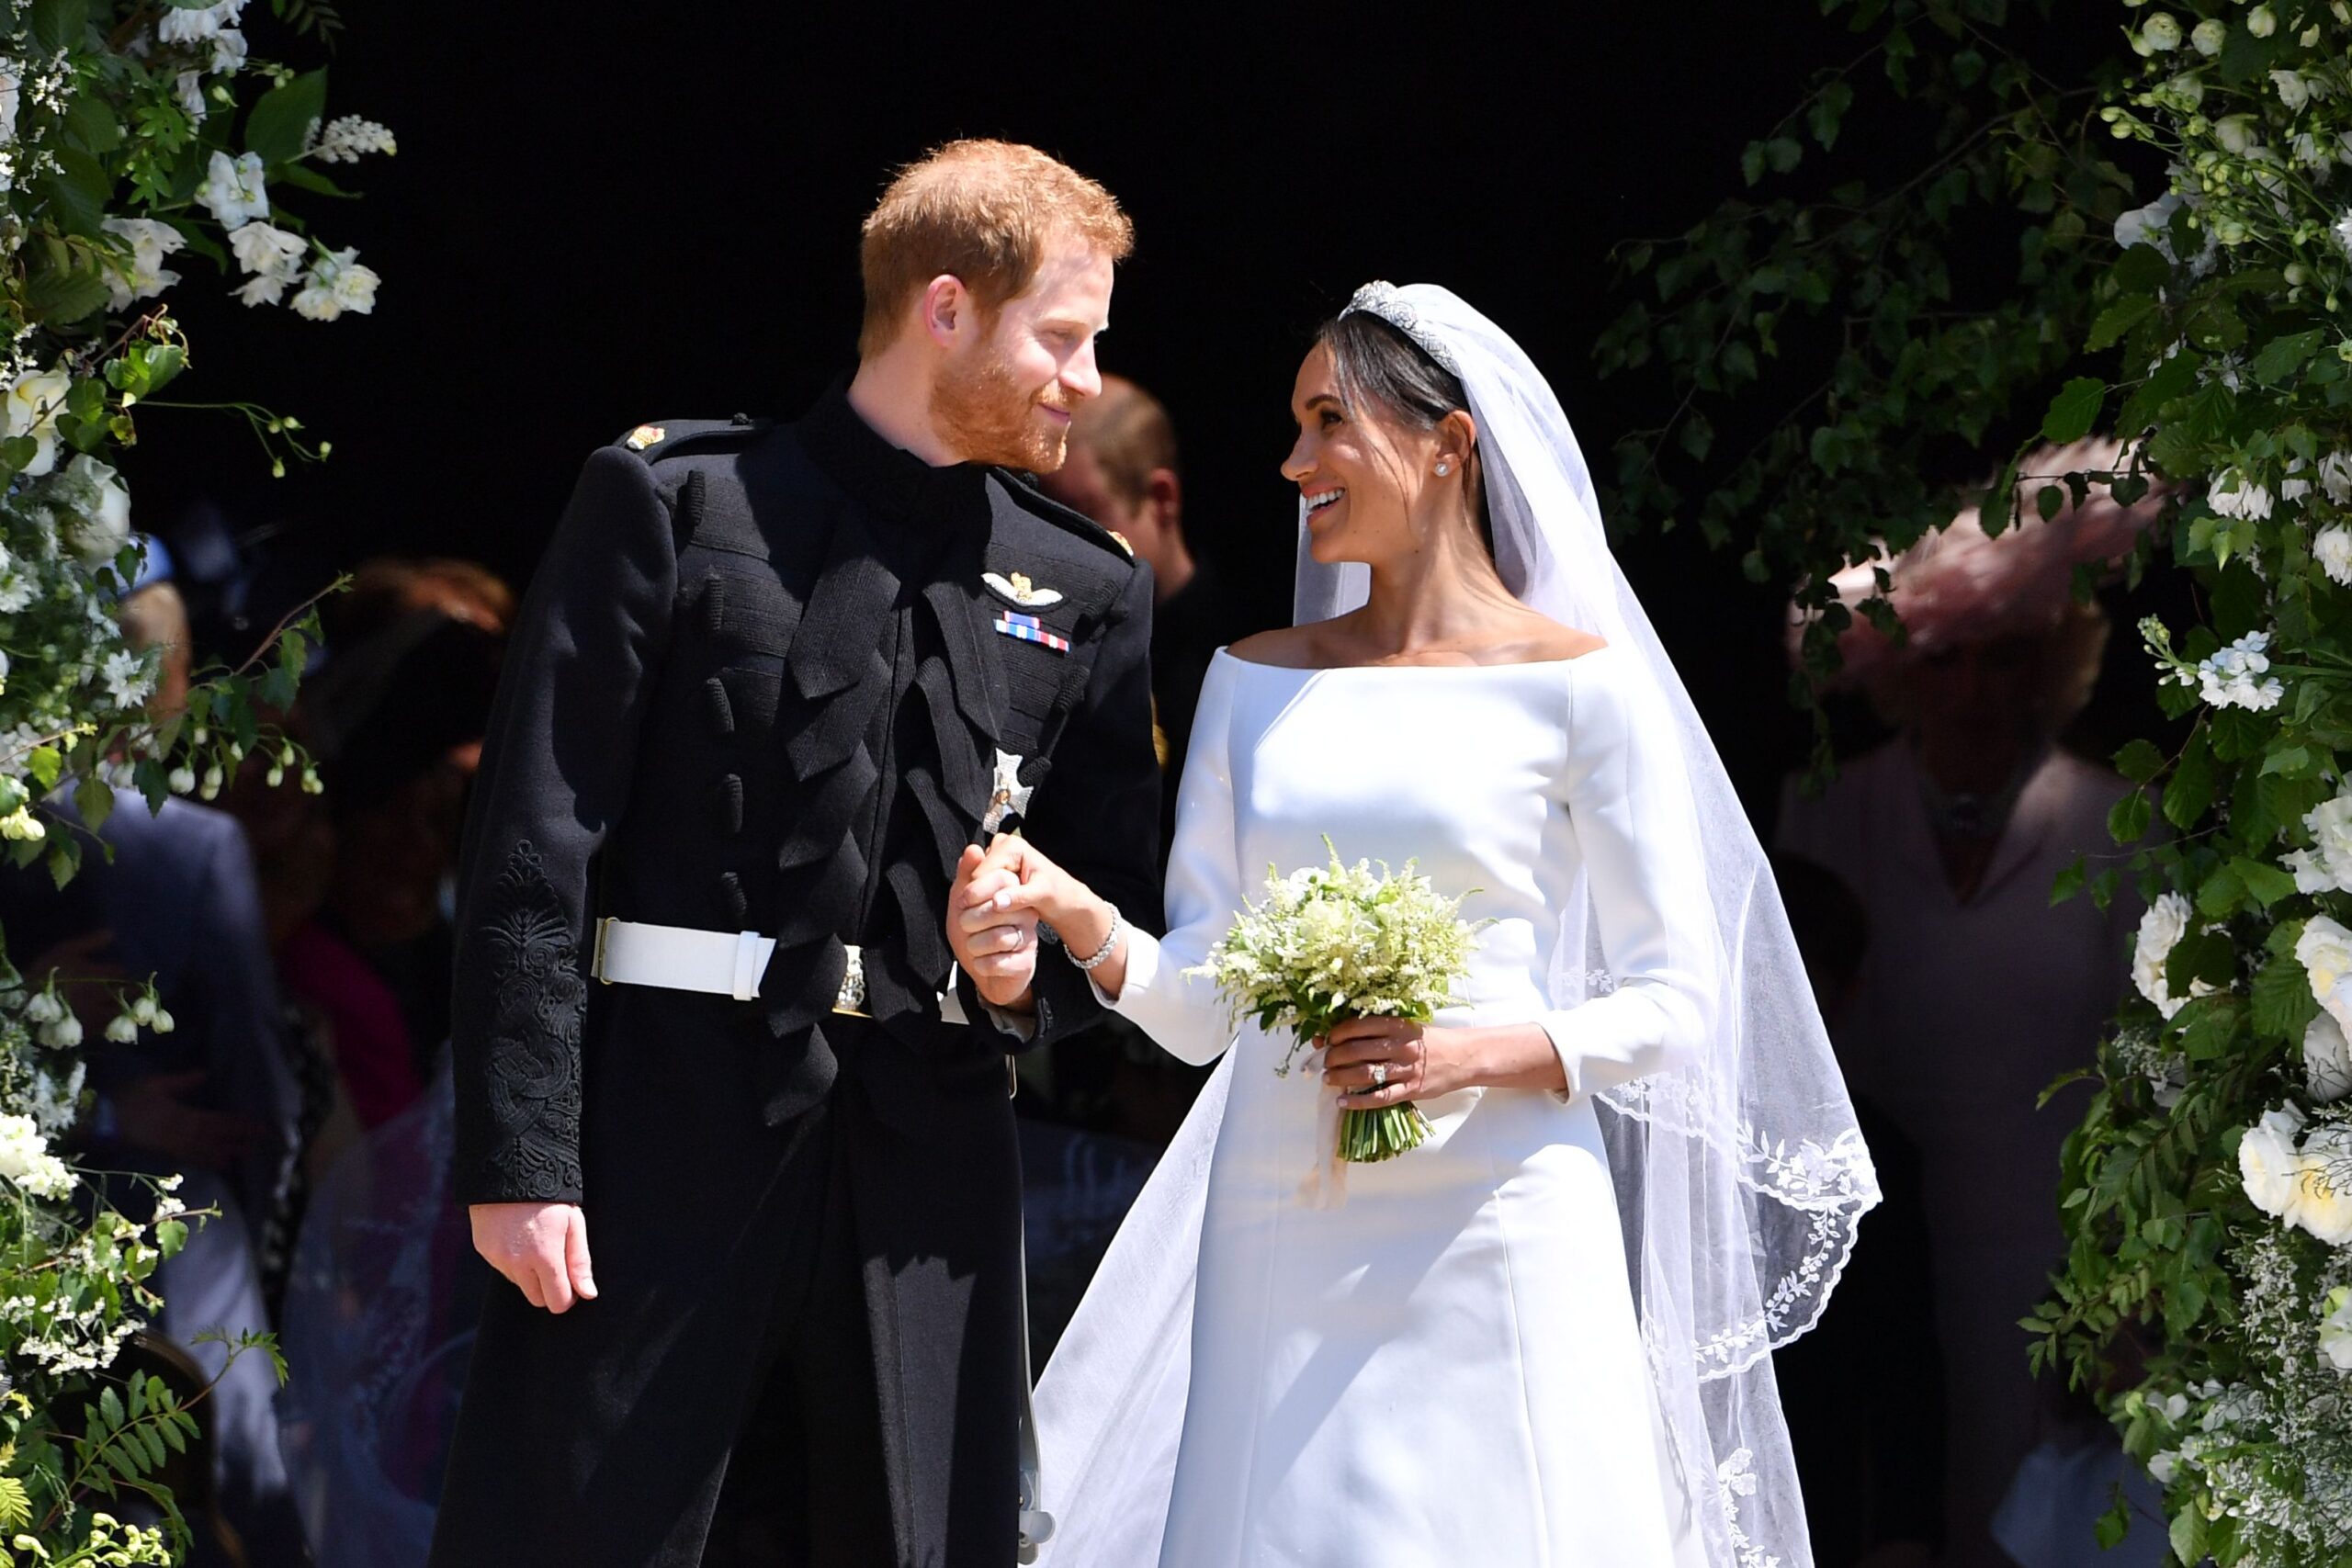 9 of the most lavish billionaire royal and celebrity weddings in